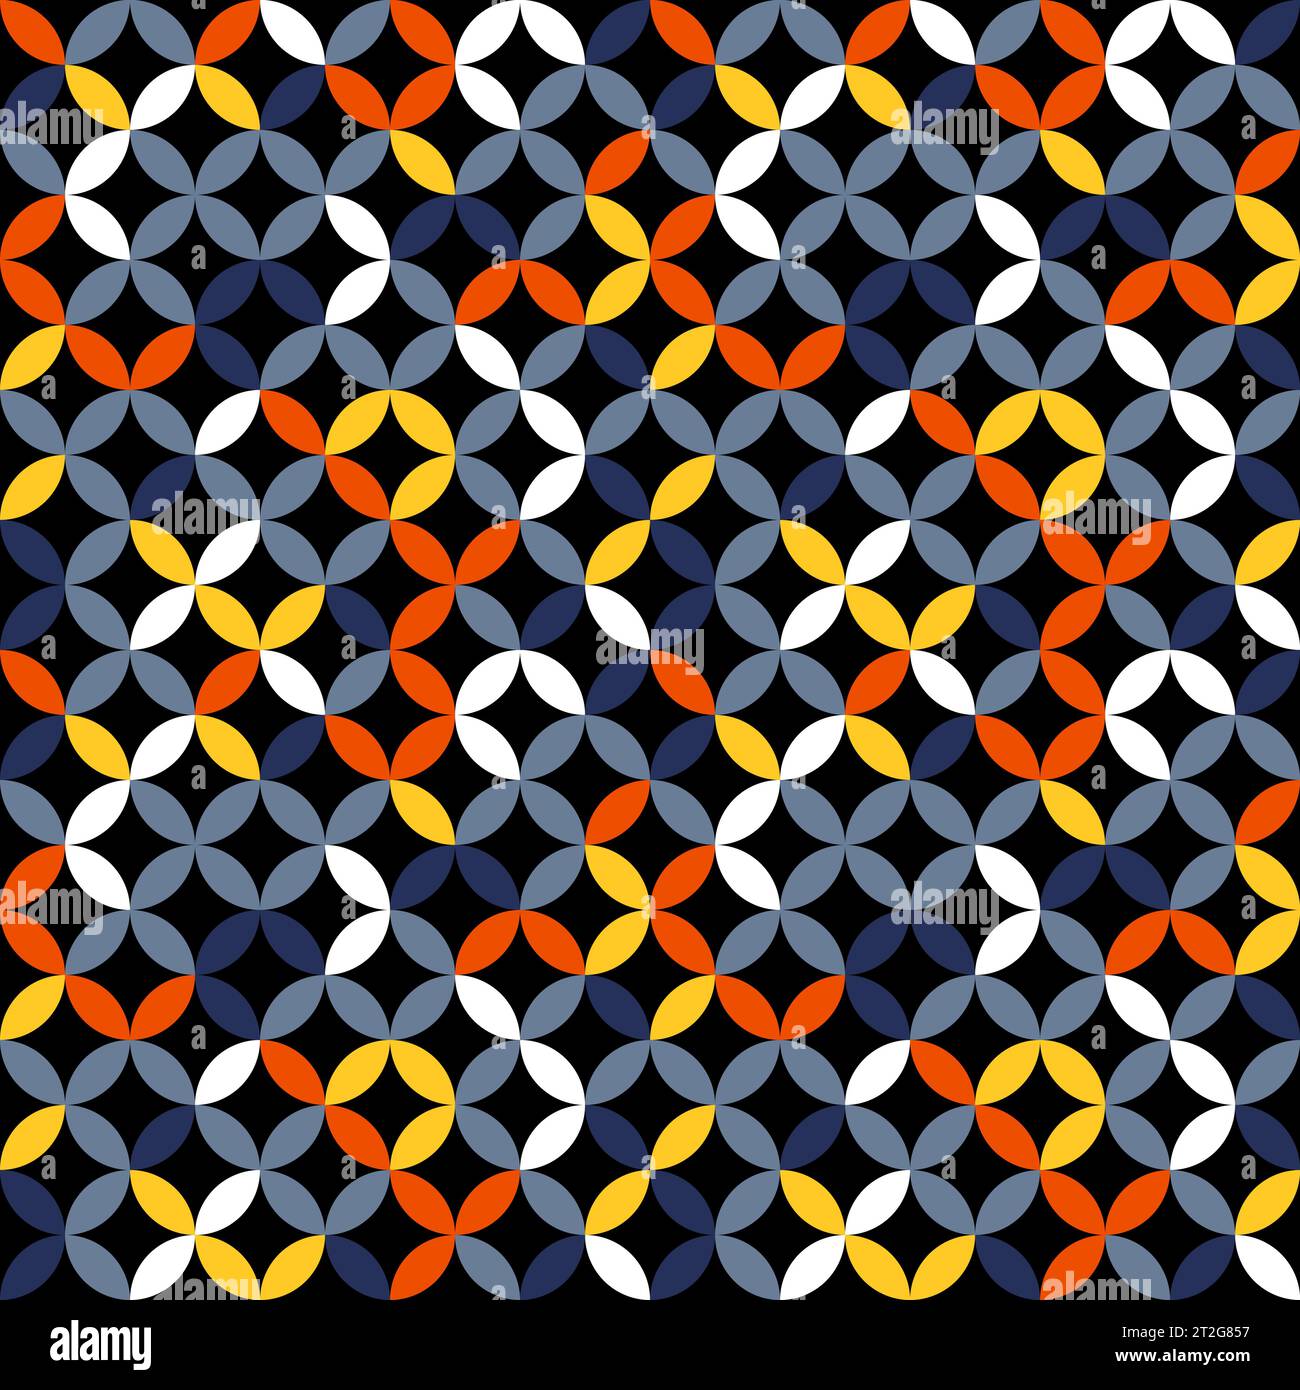 Dark blue, white and orange geometric pattern. Overlapping circles and ovals abstract retro fashion texture. Seamless pattern. Stock Vector